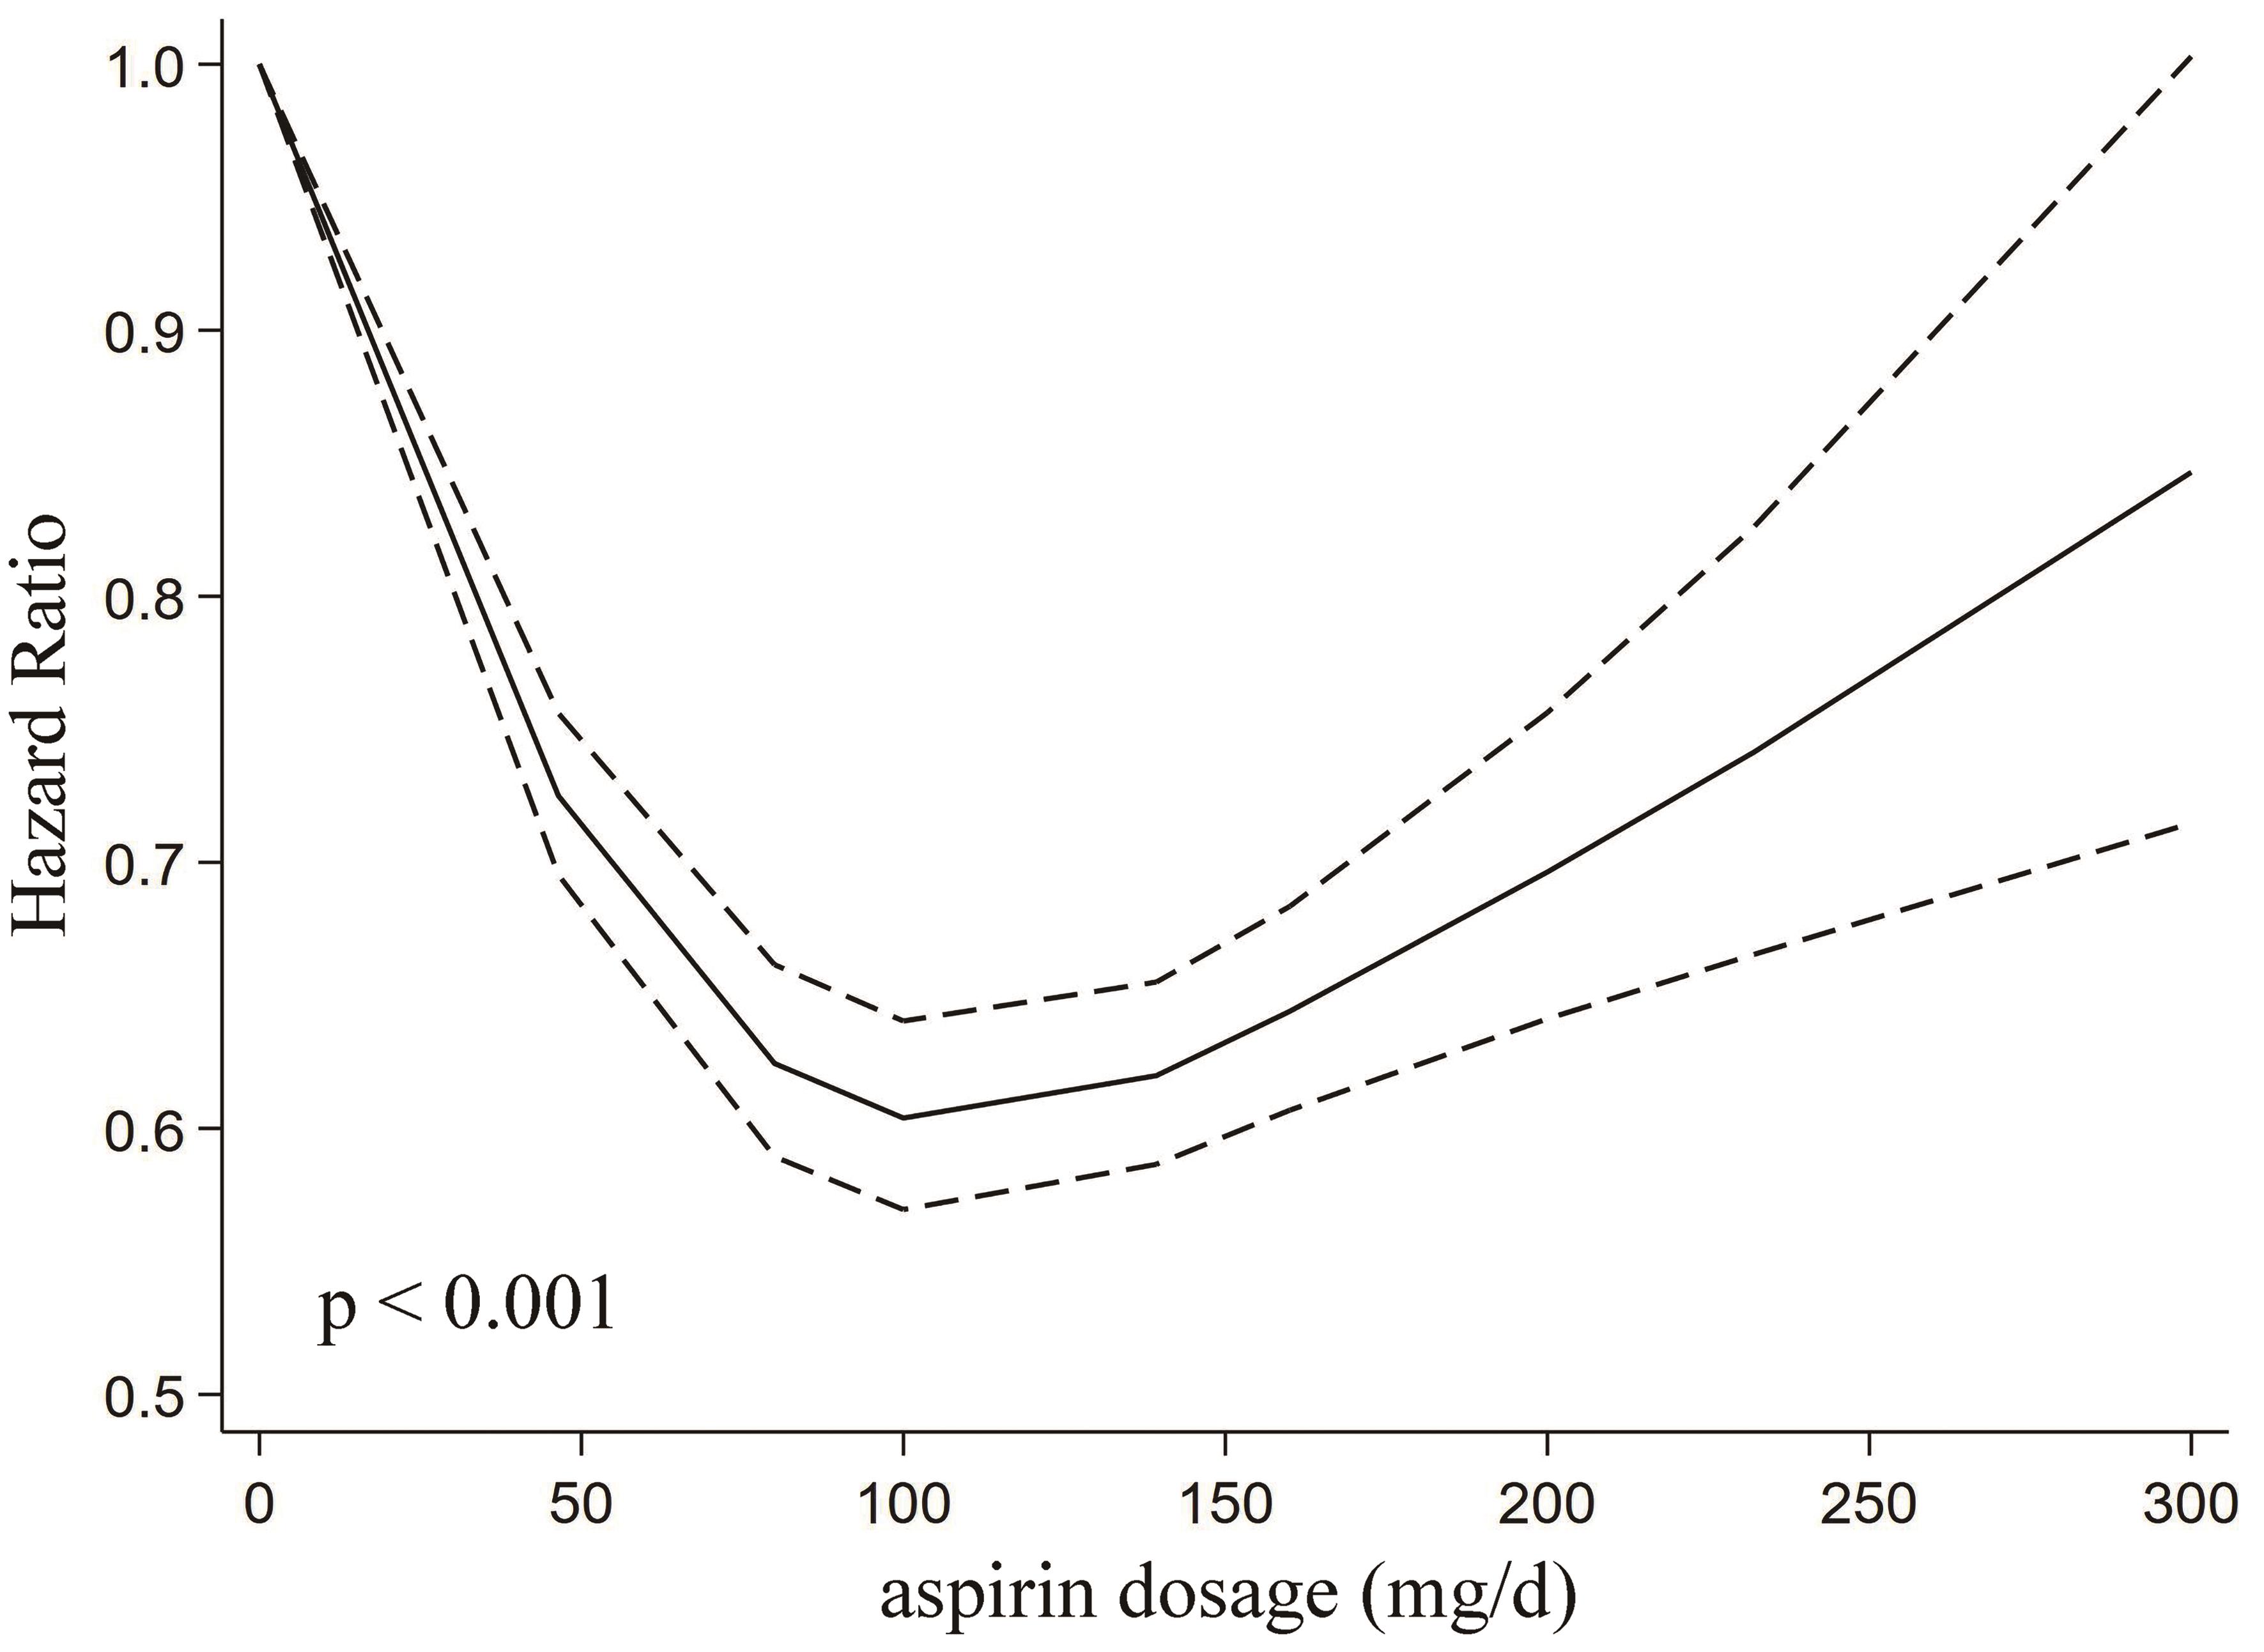 Dose-response analysis showing a nonlinear association between the aspirin dosage and HCC risk.